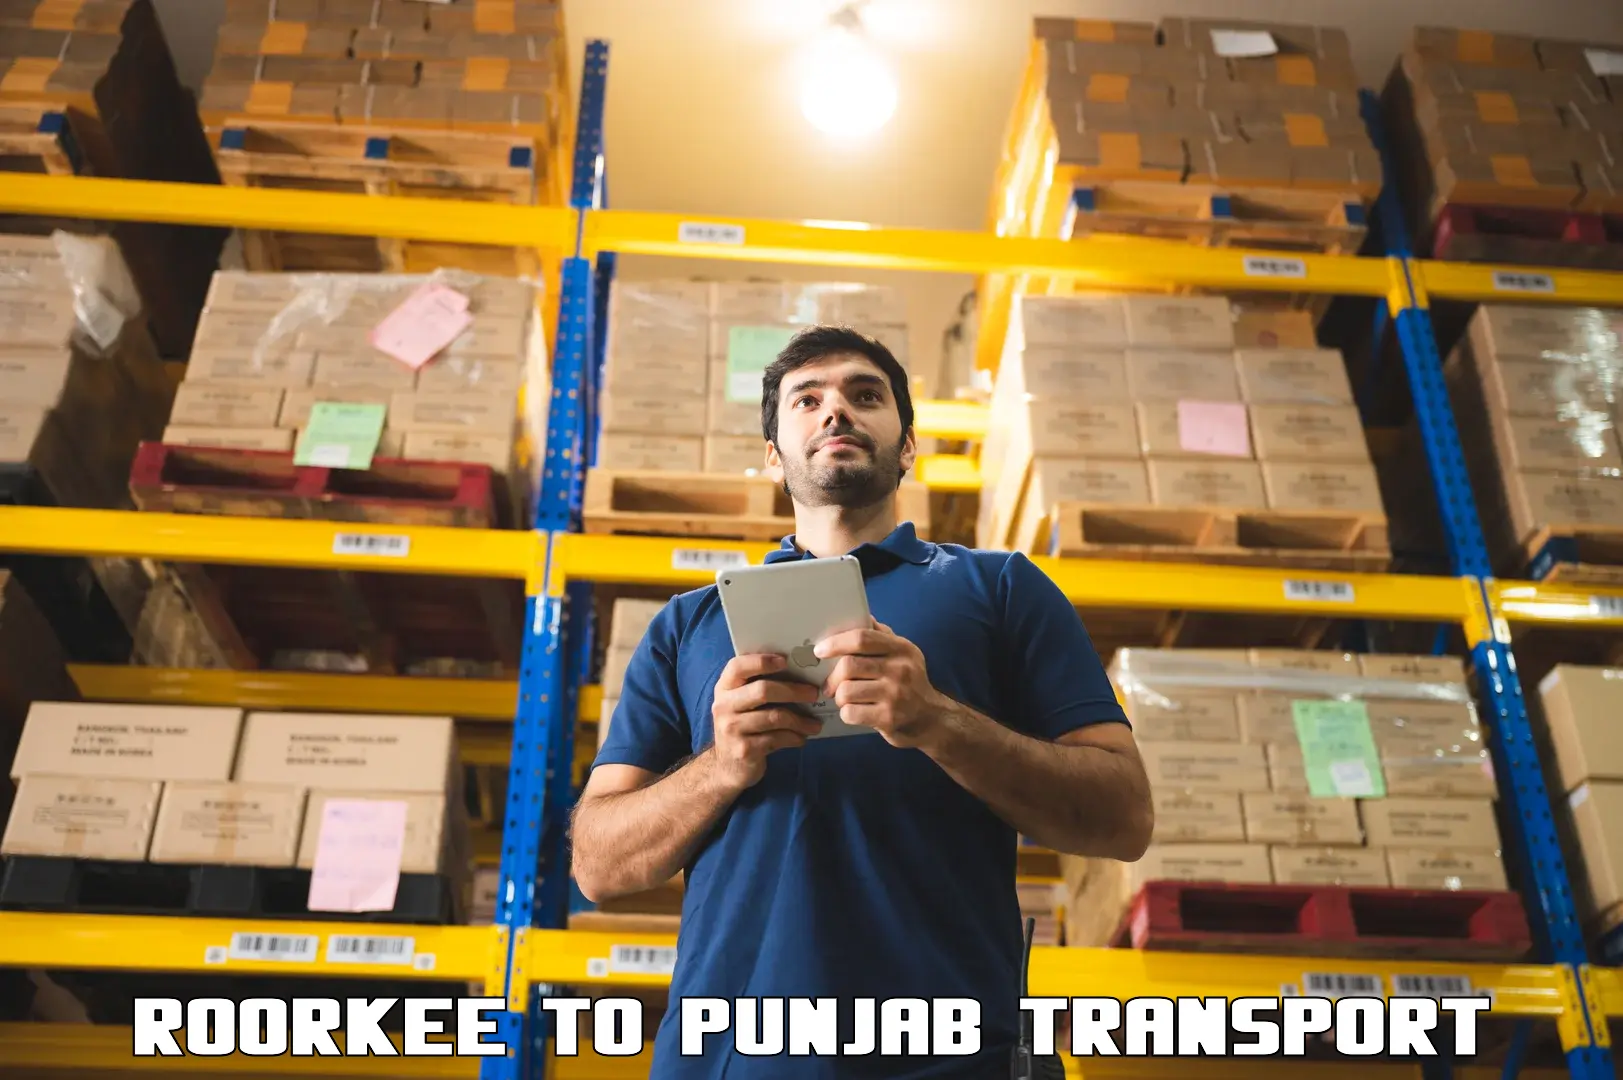 Shipping partner Roorkee to Mohali